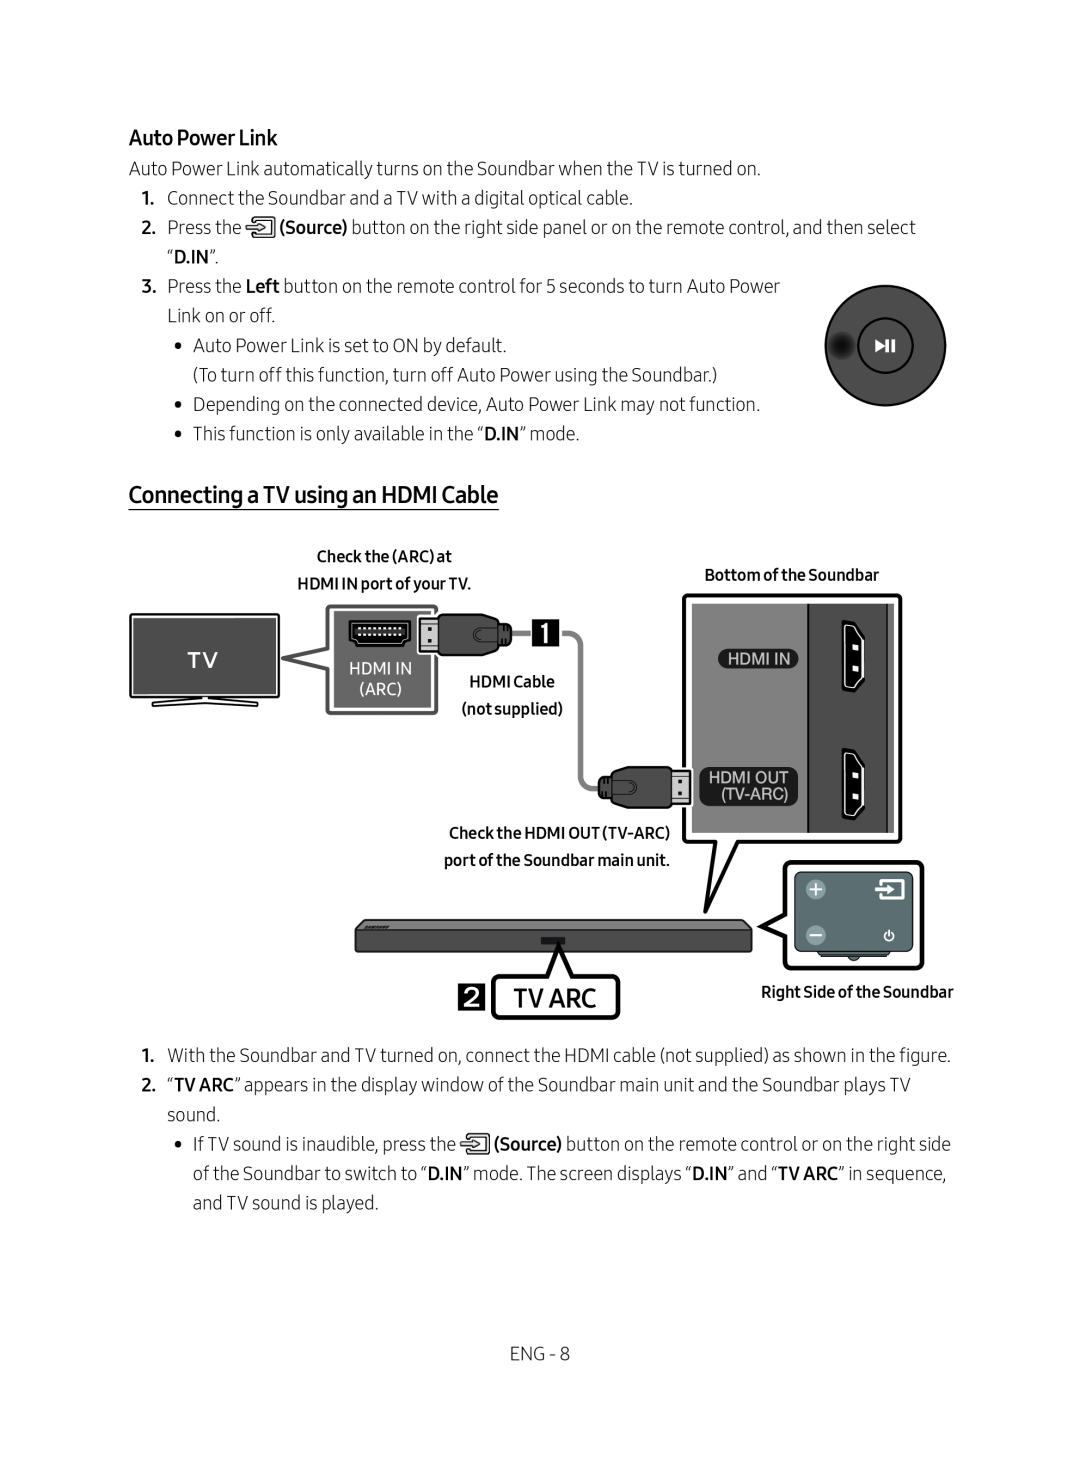 Samsung HW-M450/EN, HW-M450/ZG, HW-M450/ZF manual  Tv Arc, Connecting a TV using an HDMI Cable, Auto Power Link 